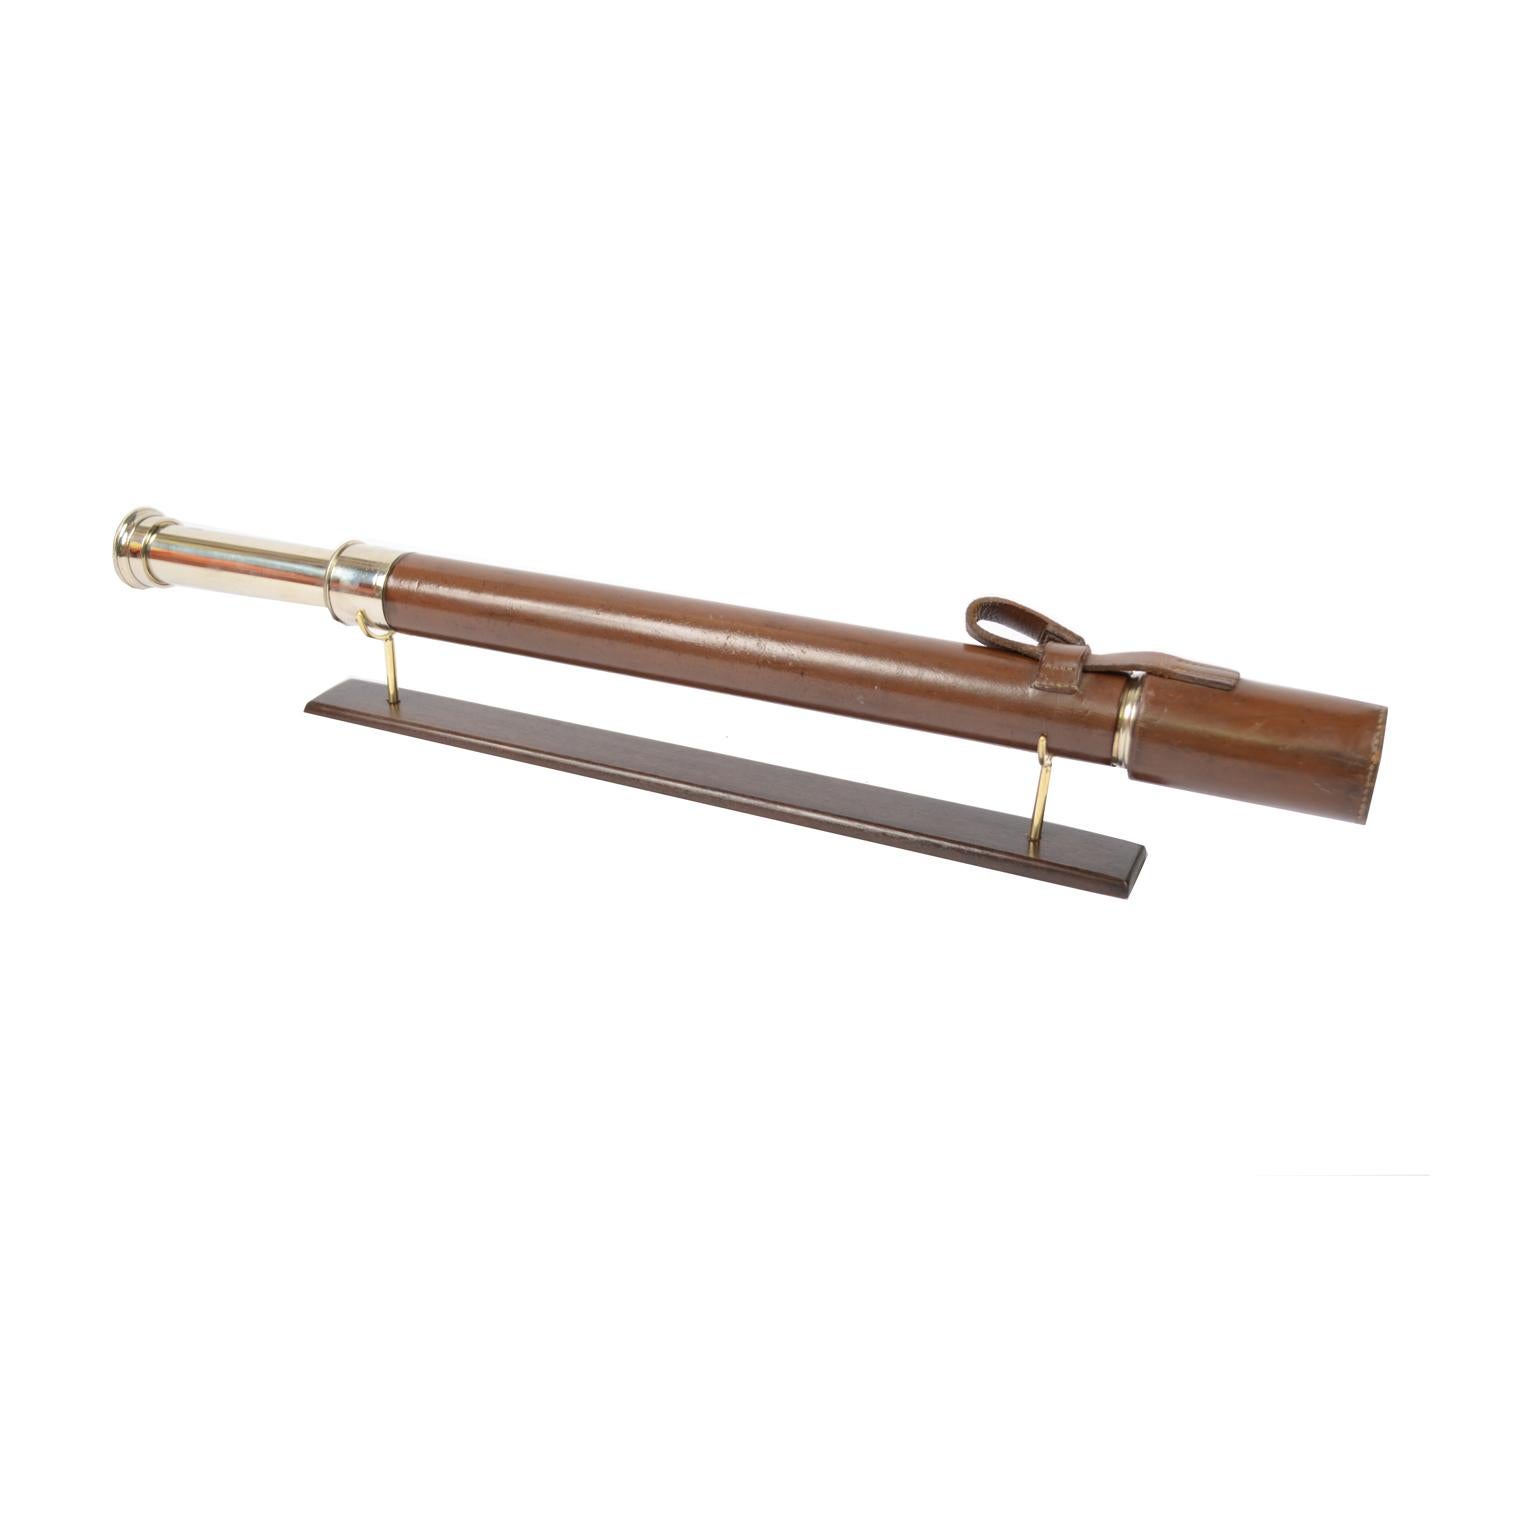 Brass telescope covered with leather, one extension, signed Hezzanith Heath & Co London SE9 2980, from the 1940s. Sun visor extension with leather cap, dust cap. Minimum length 46.5 cm, maximum 64, focal diameter 3.5 cm. Very good condition. With